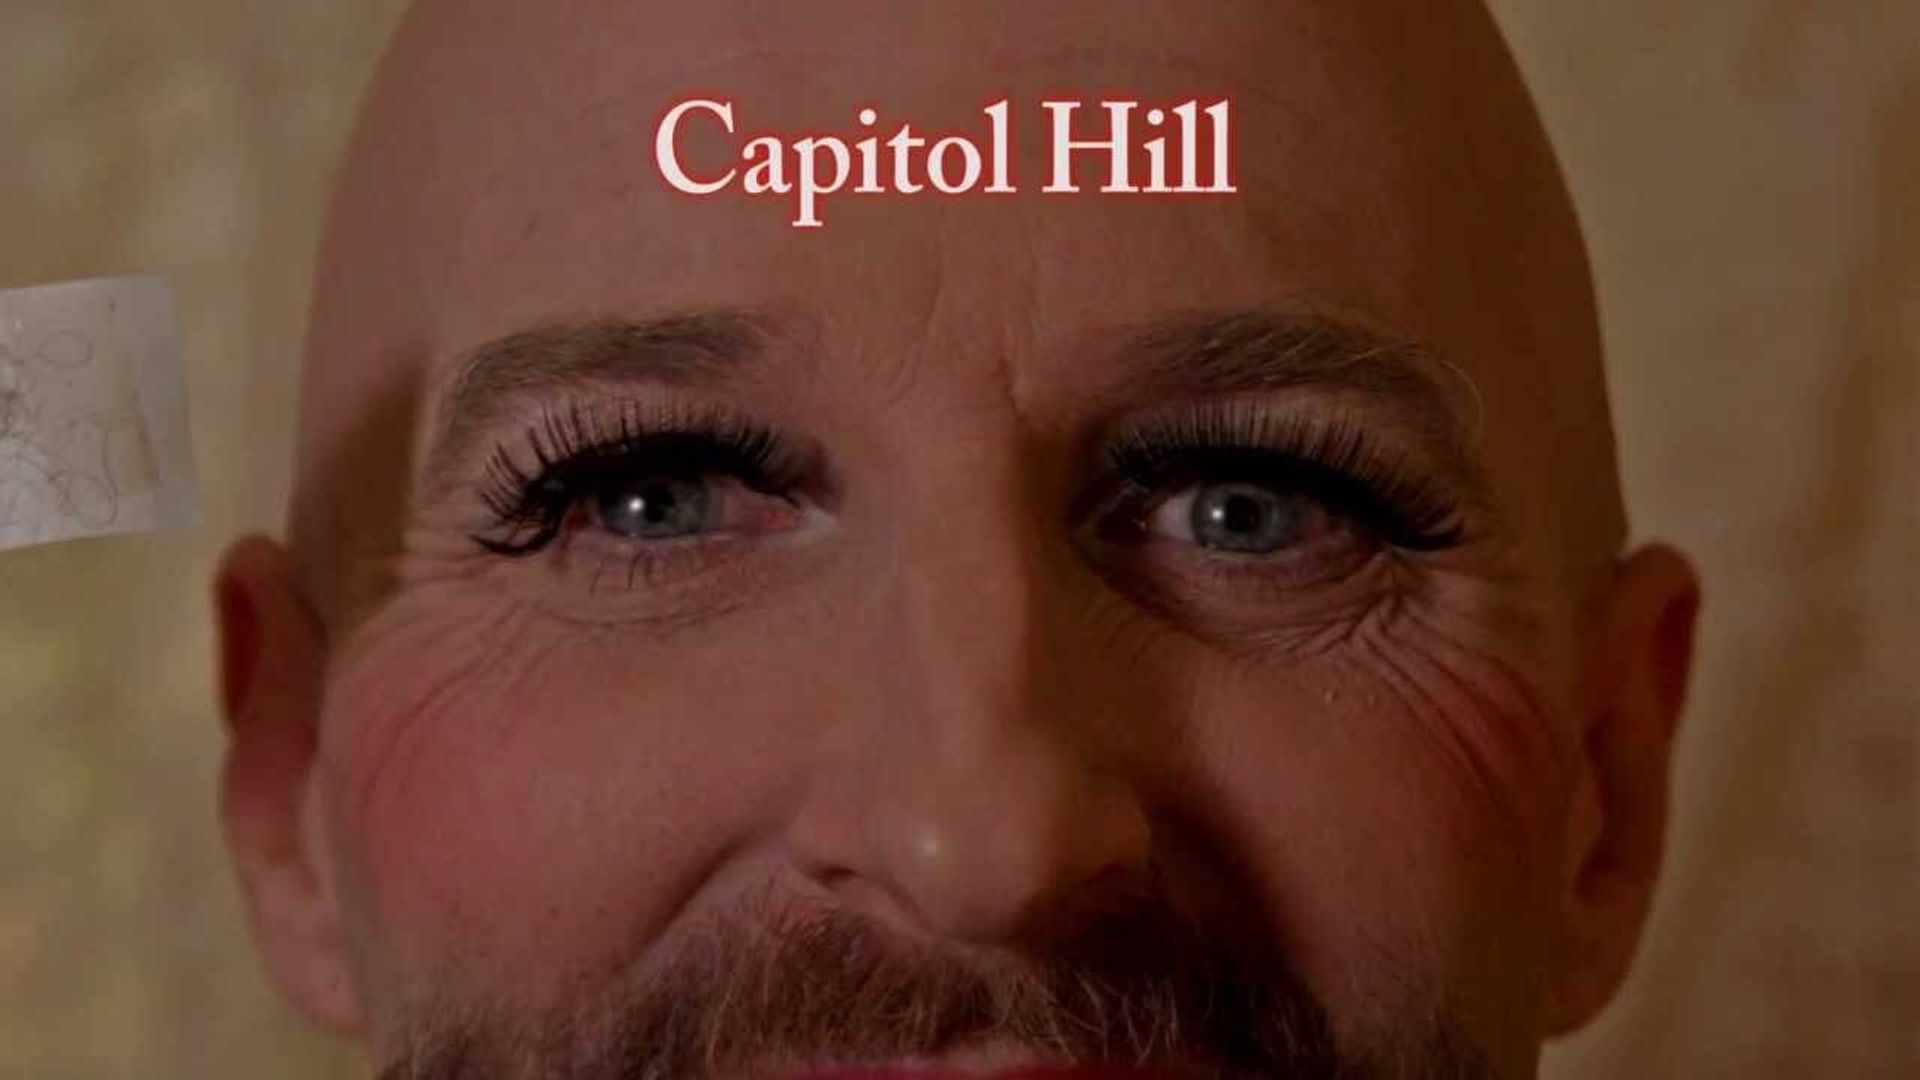 Capitol Hill background